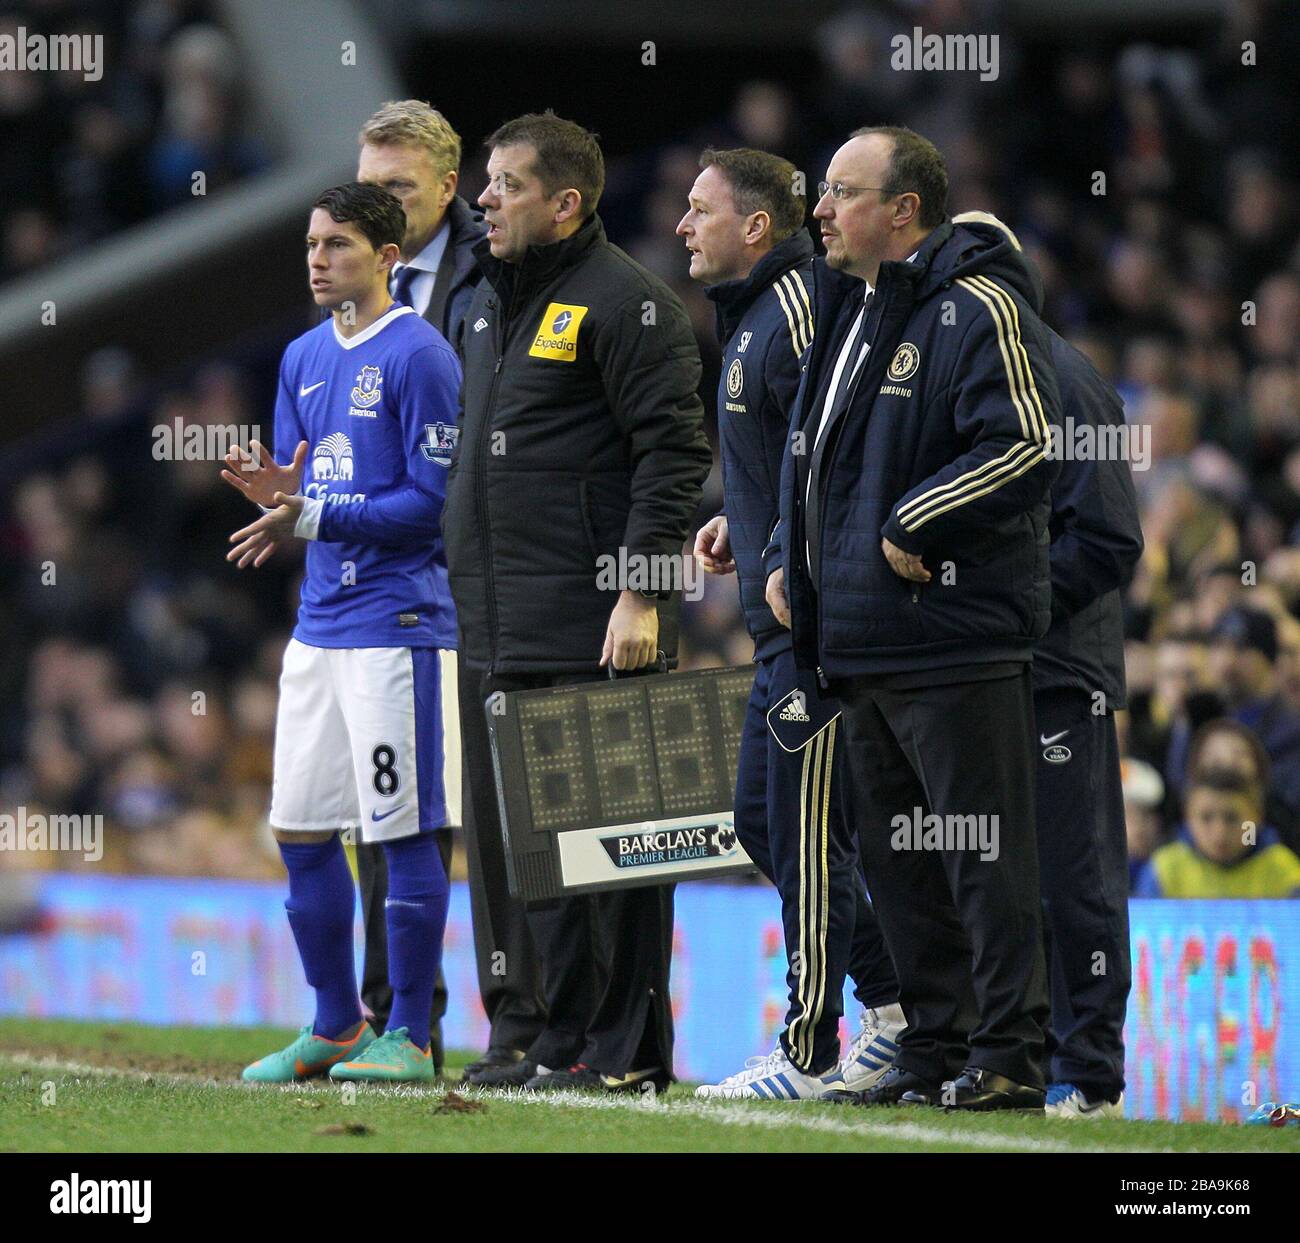 Everton's Bryan Oviedo (8) waits to come on as a substitute Stock Photo